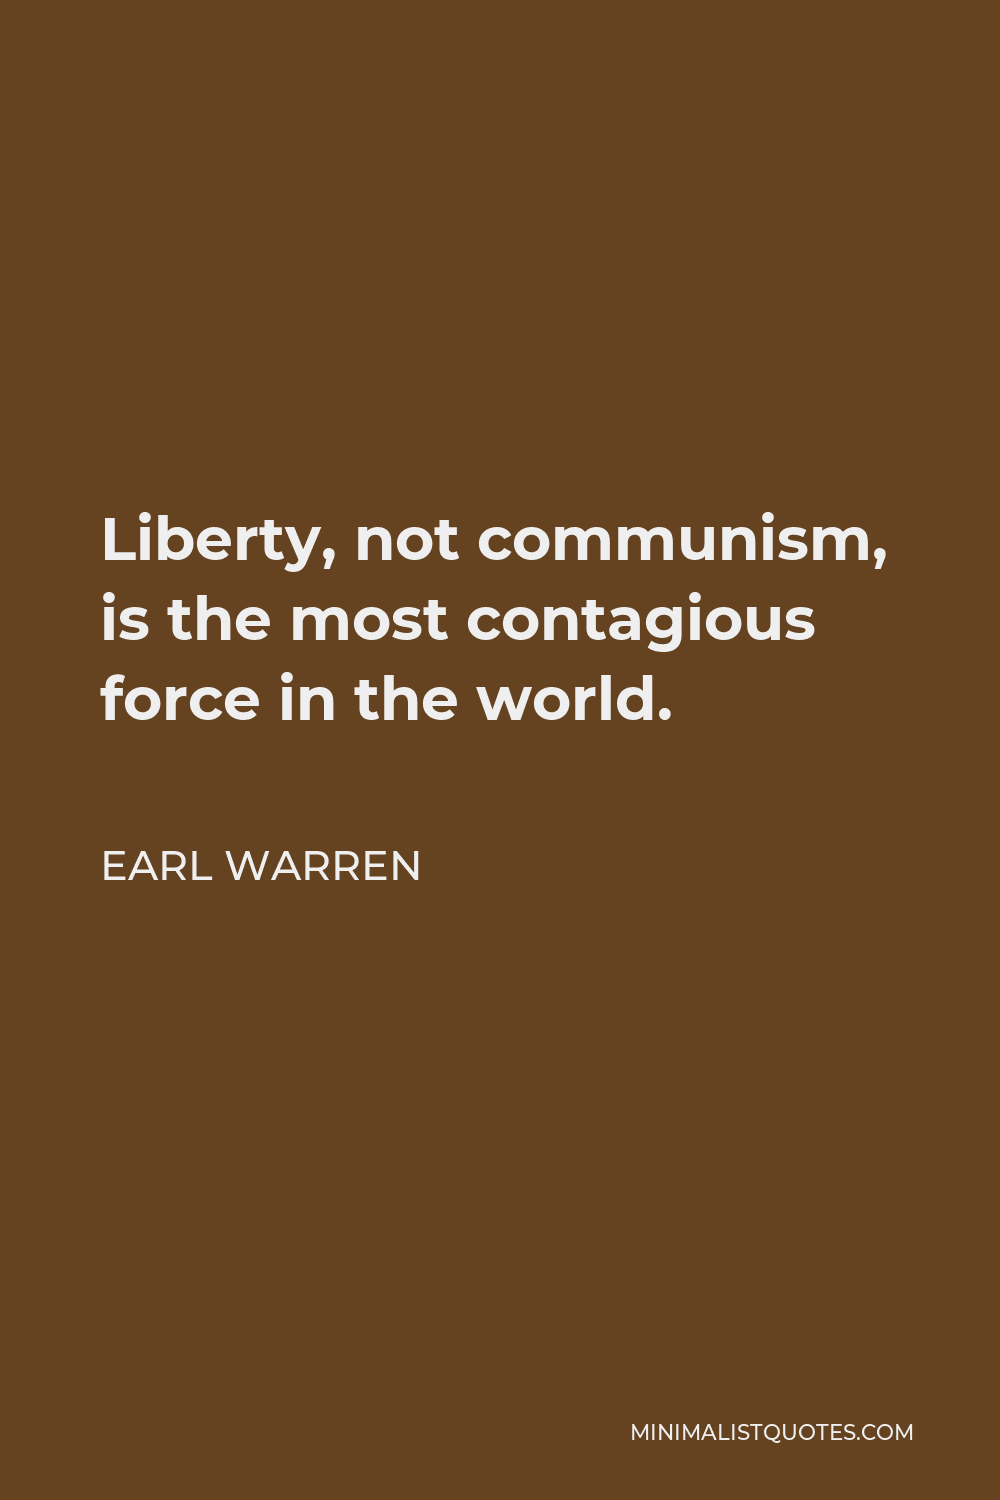 Earl Warren Quote - Liberty, not communism, is the most contagious force in the world.